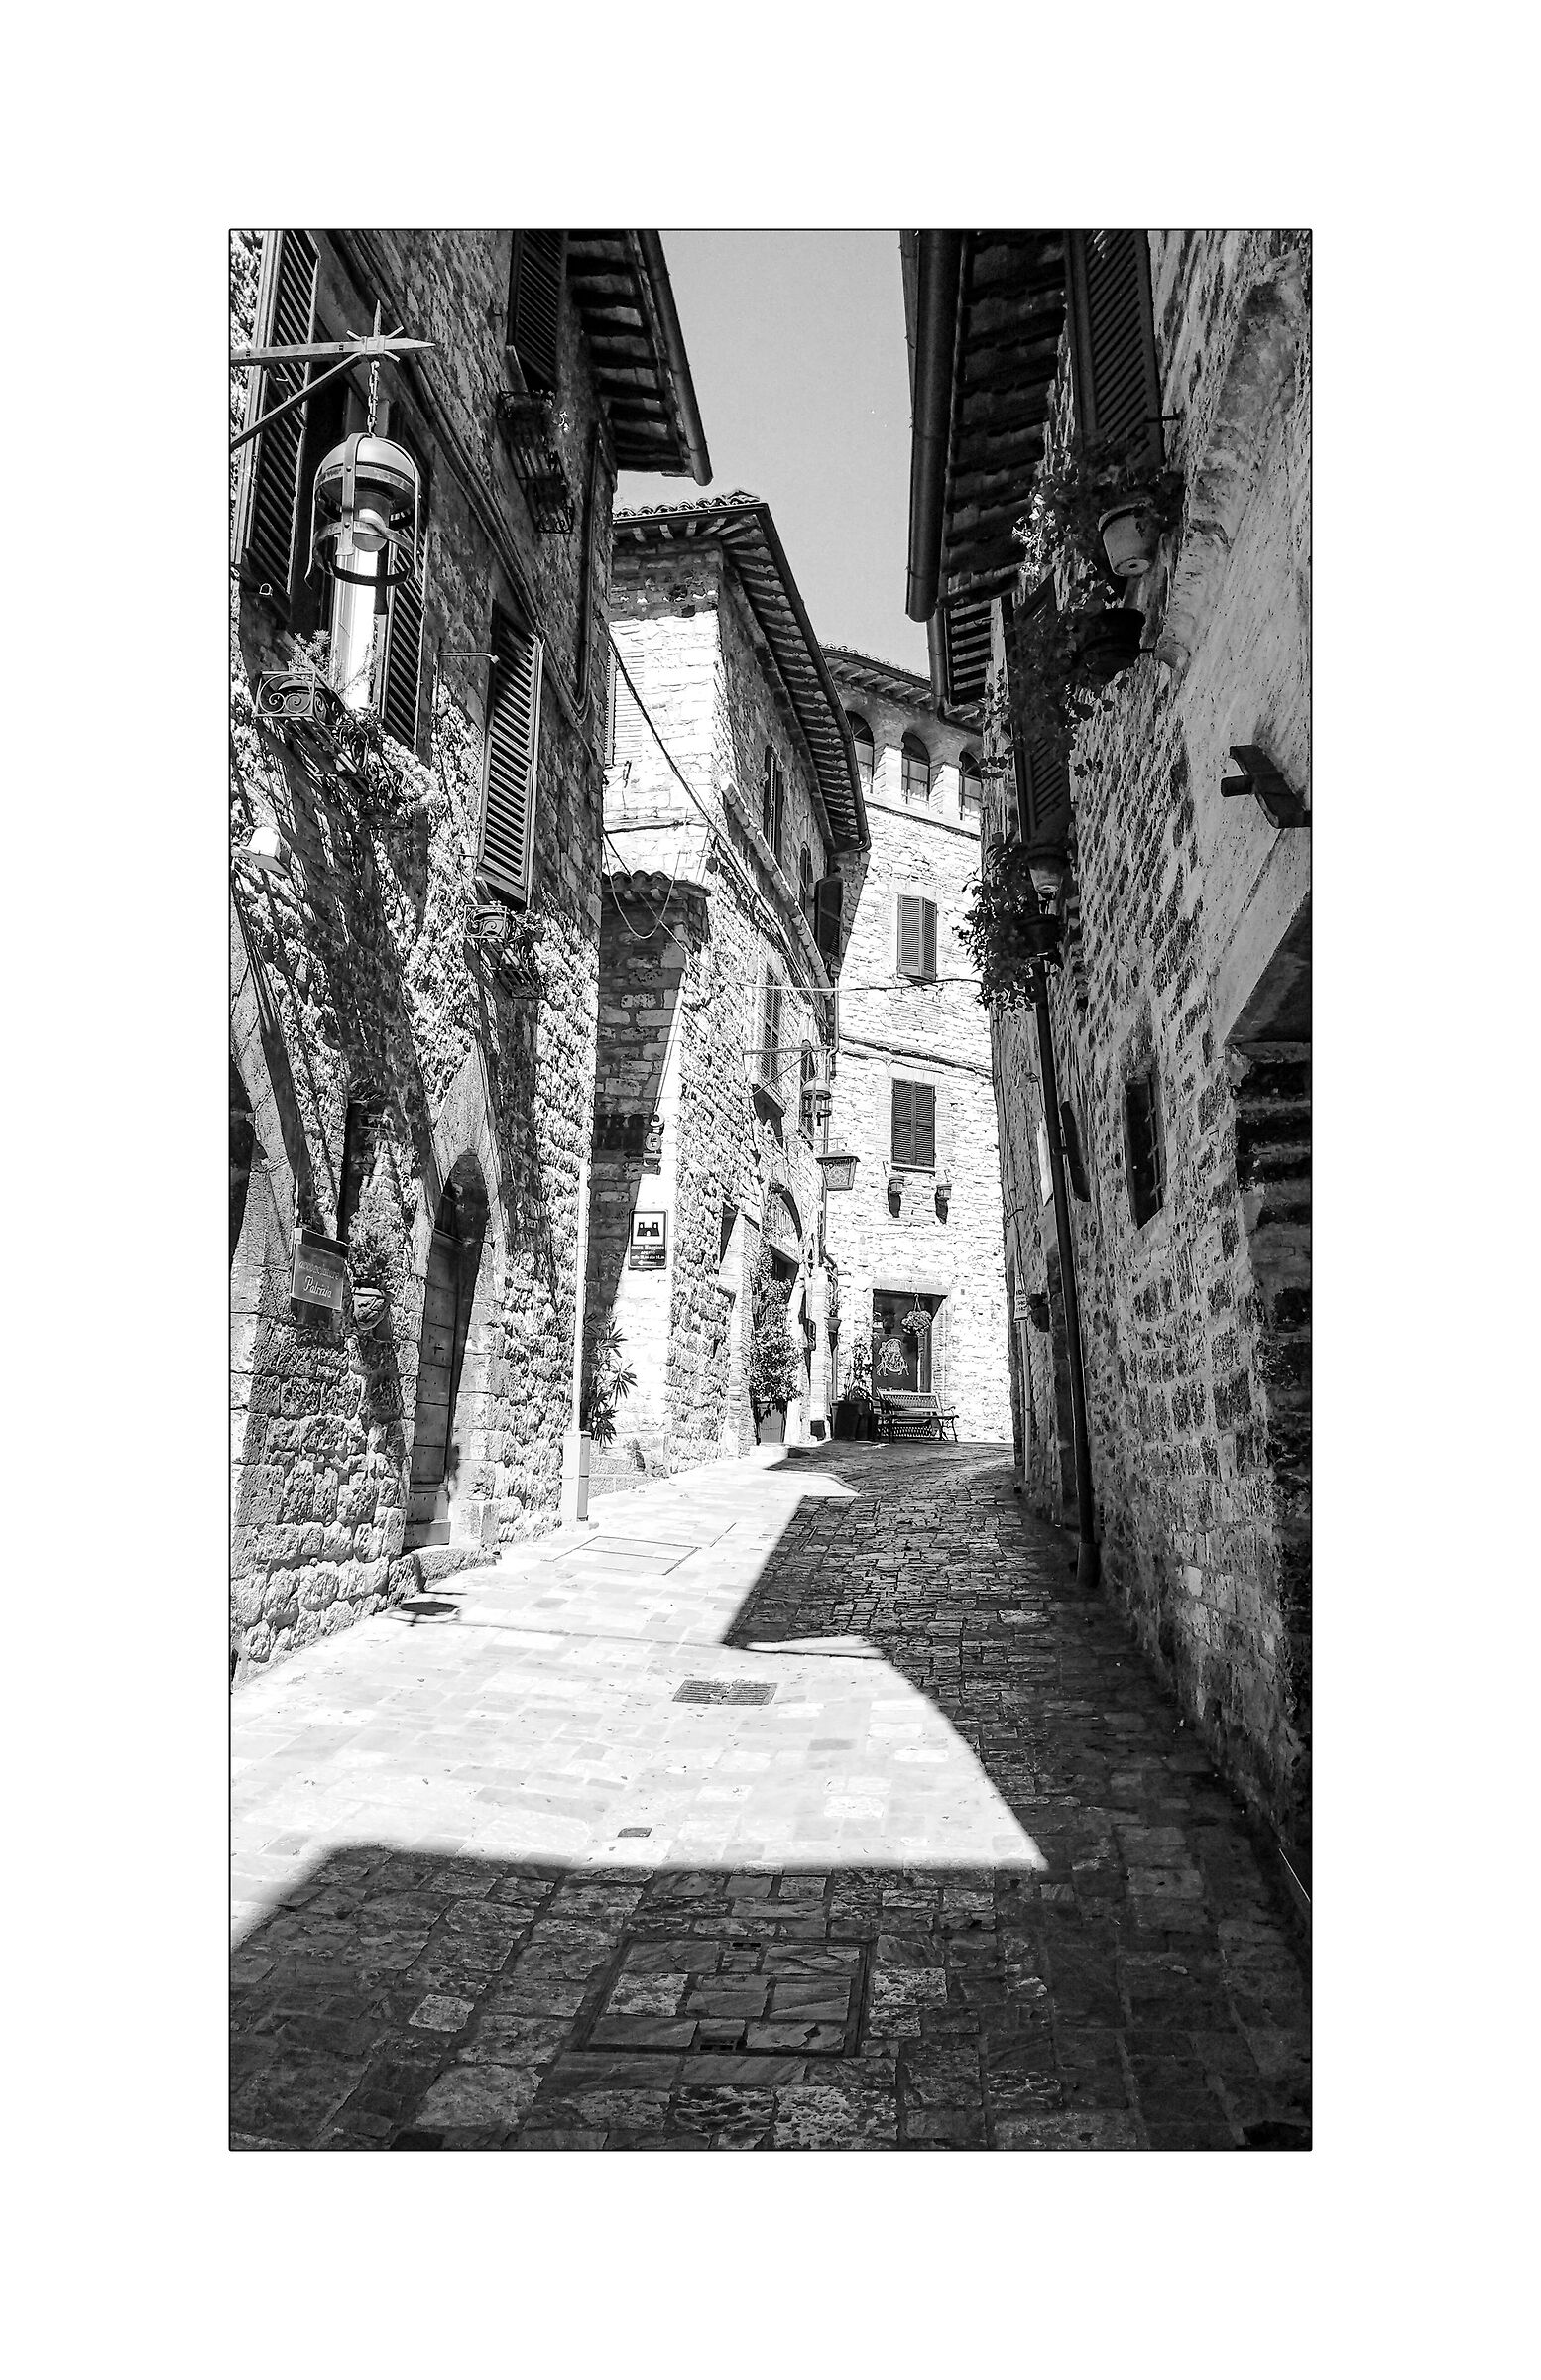 On the streets of Assisi...